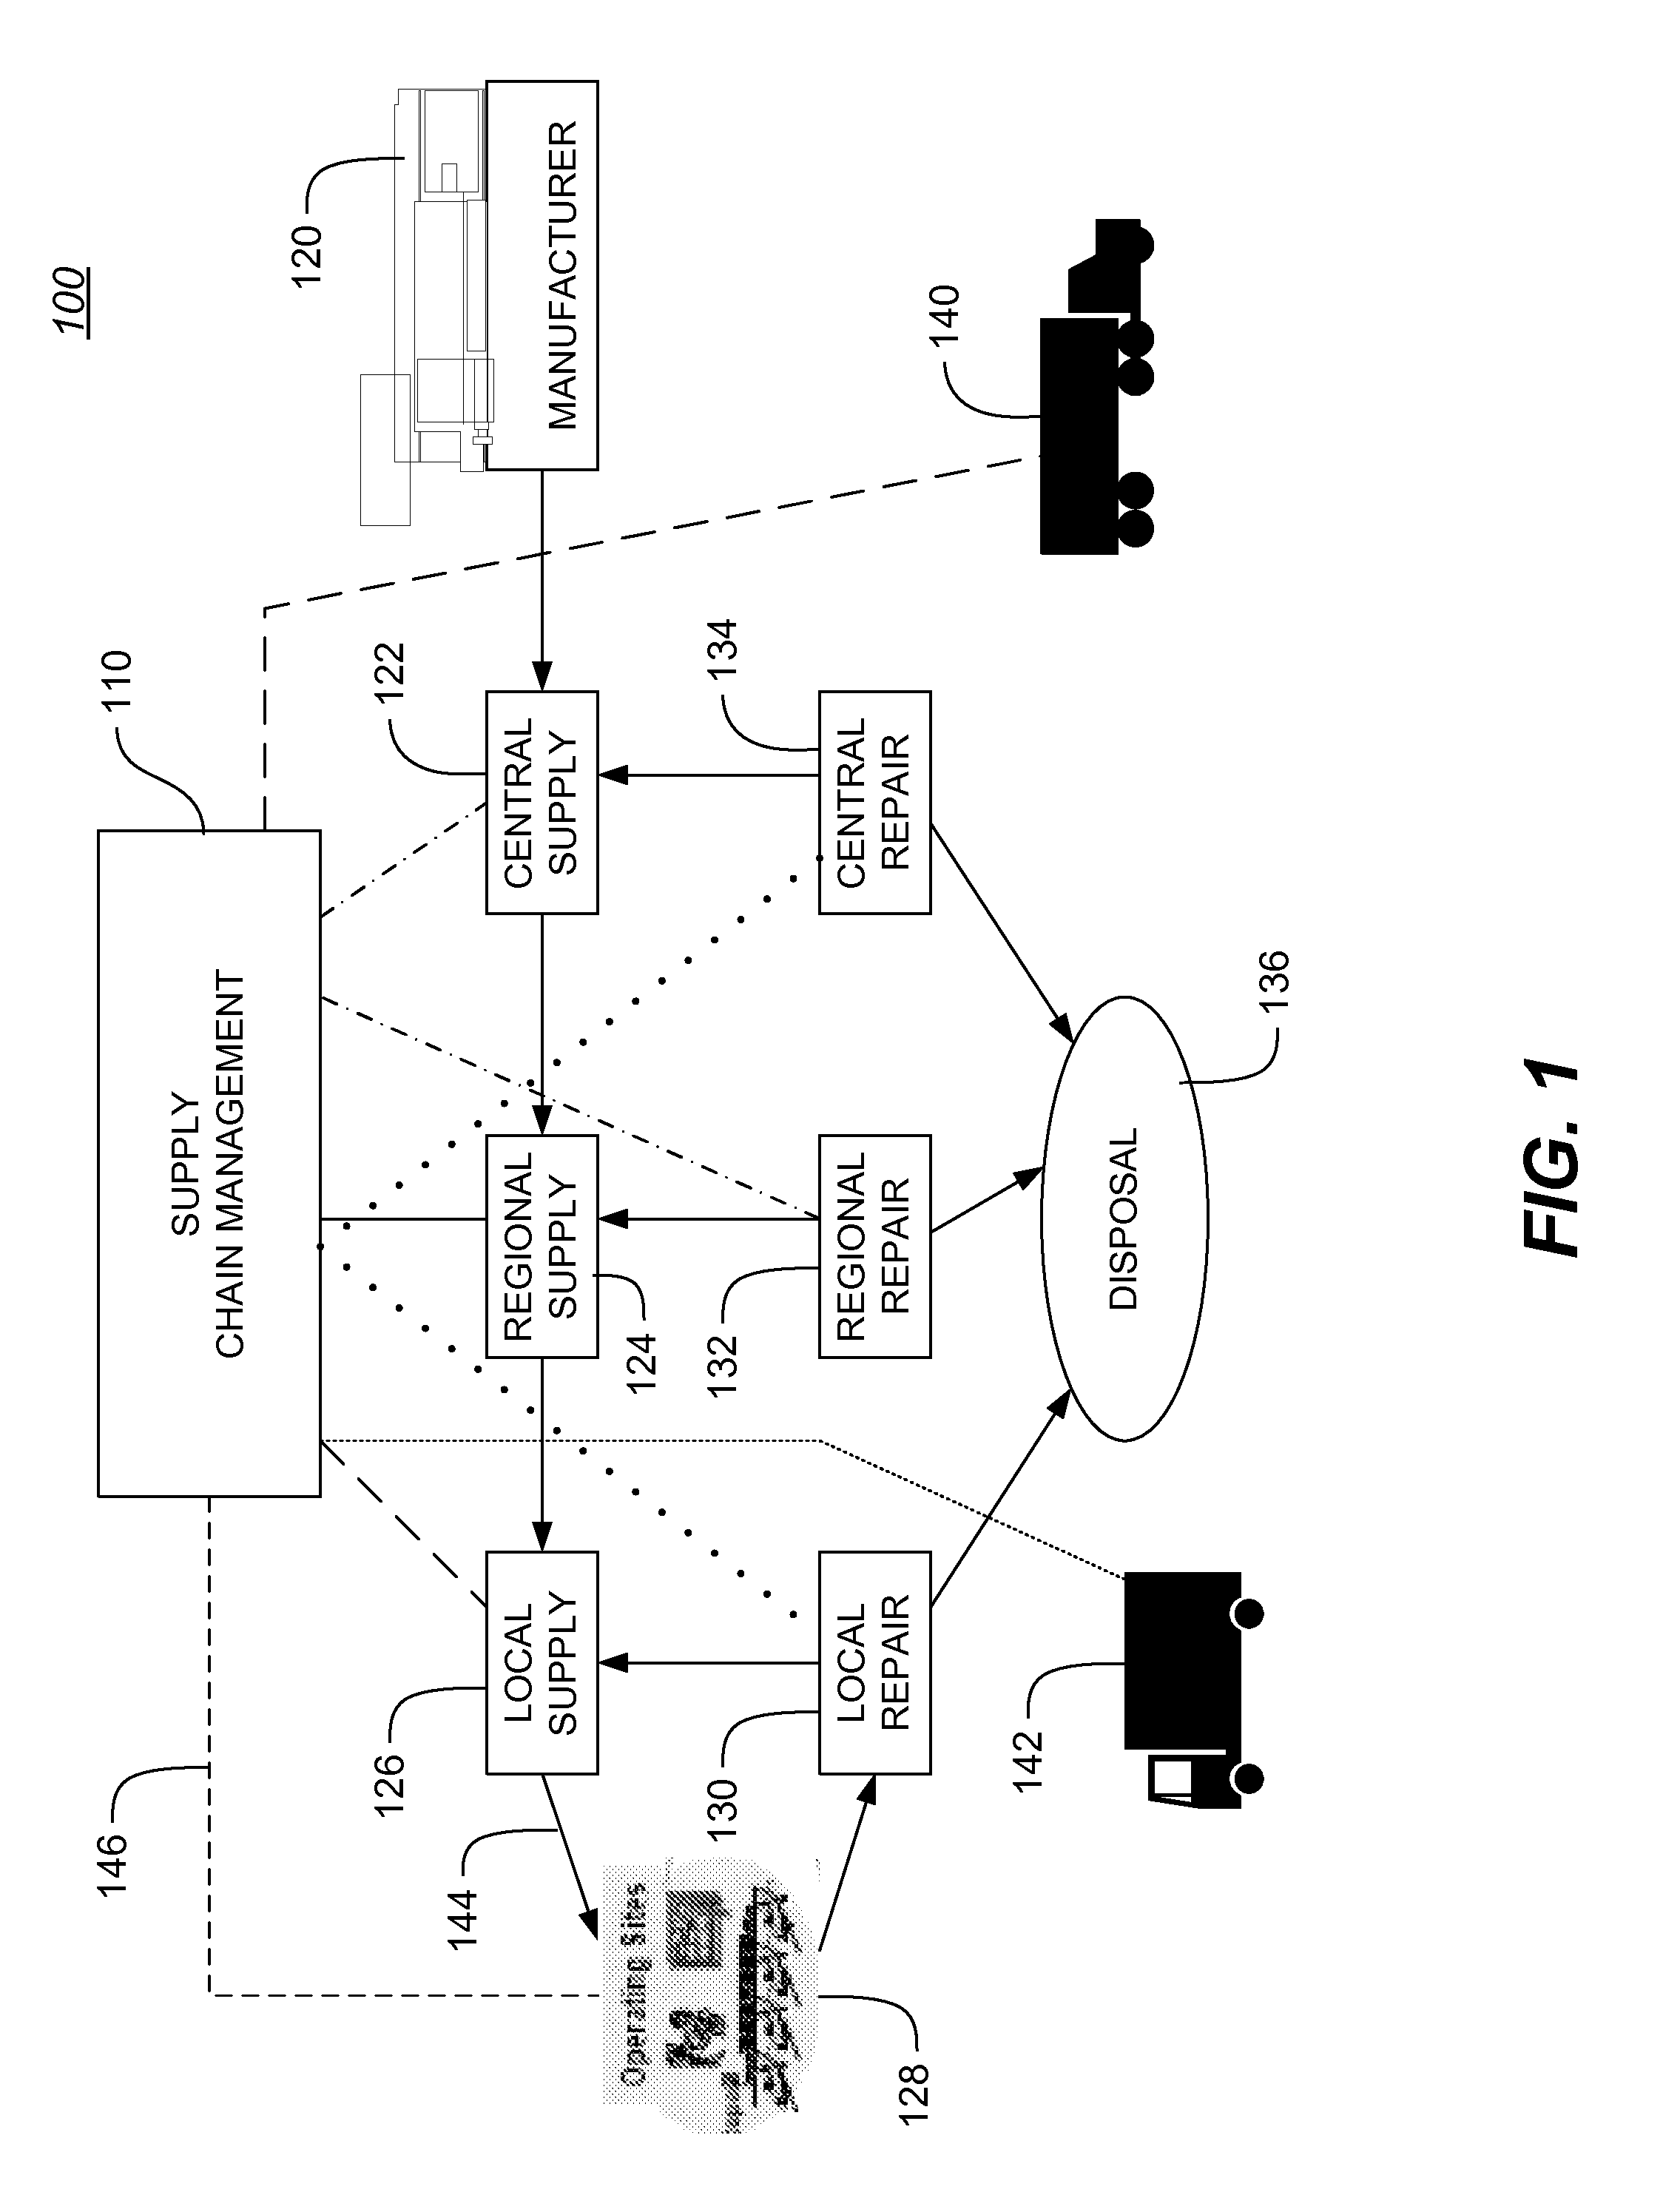 Systems, methods and apparatus for just-in time scheduling and planning